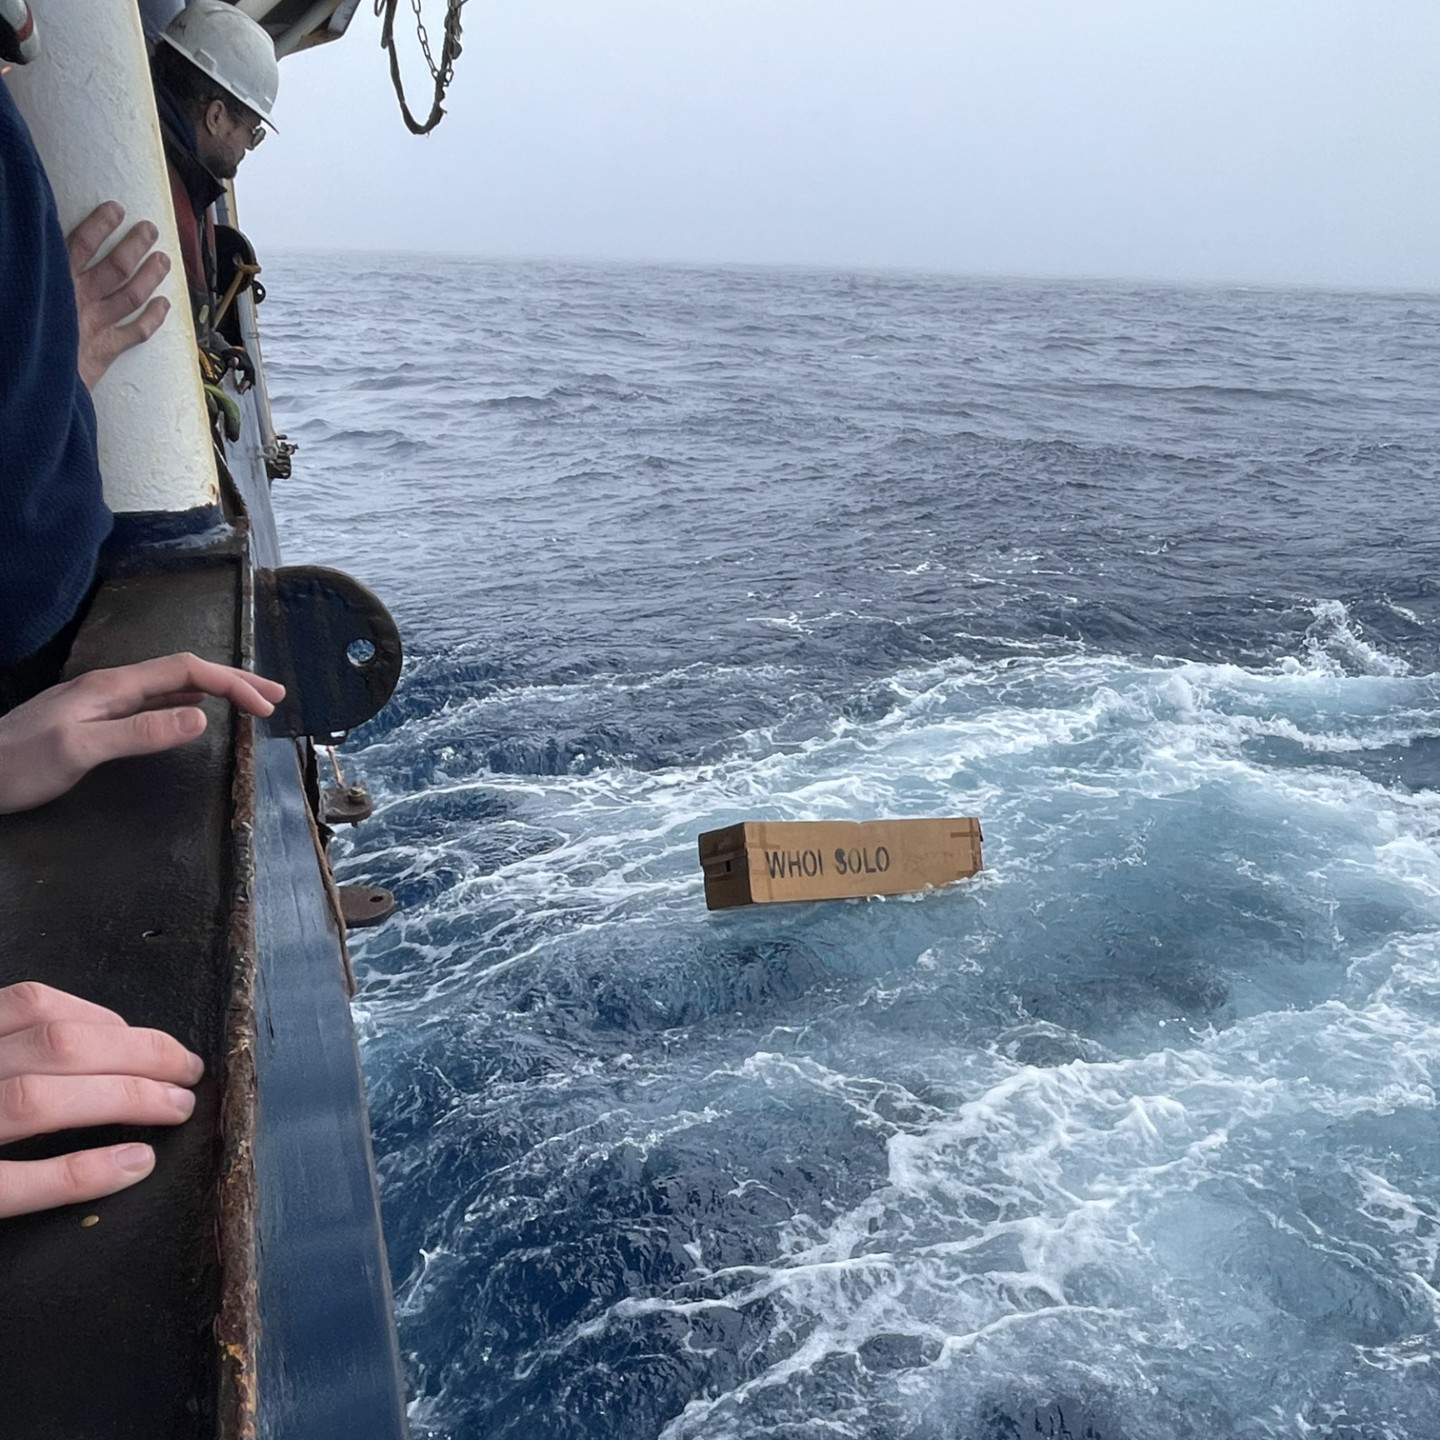 Not long after deployment, it drifted away from the ship, the release box slipped loose, and the float was on its way!